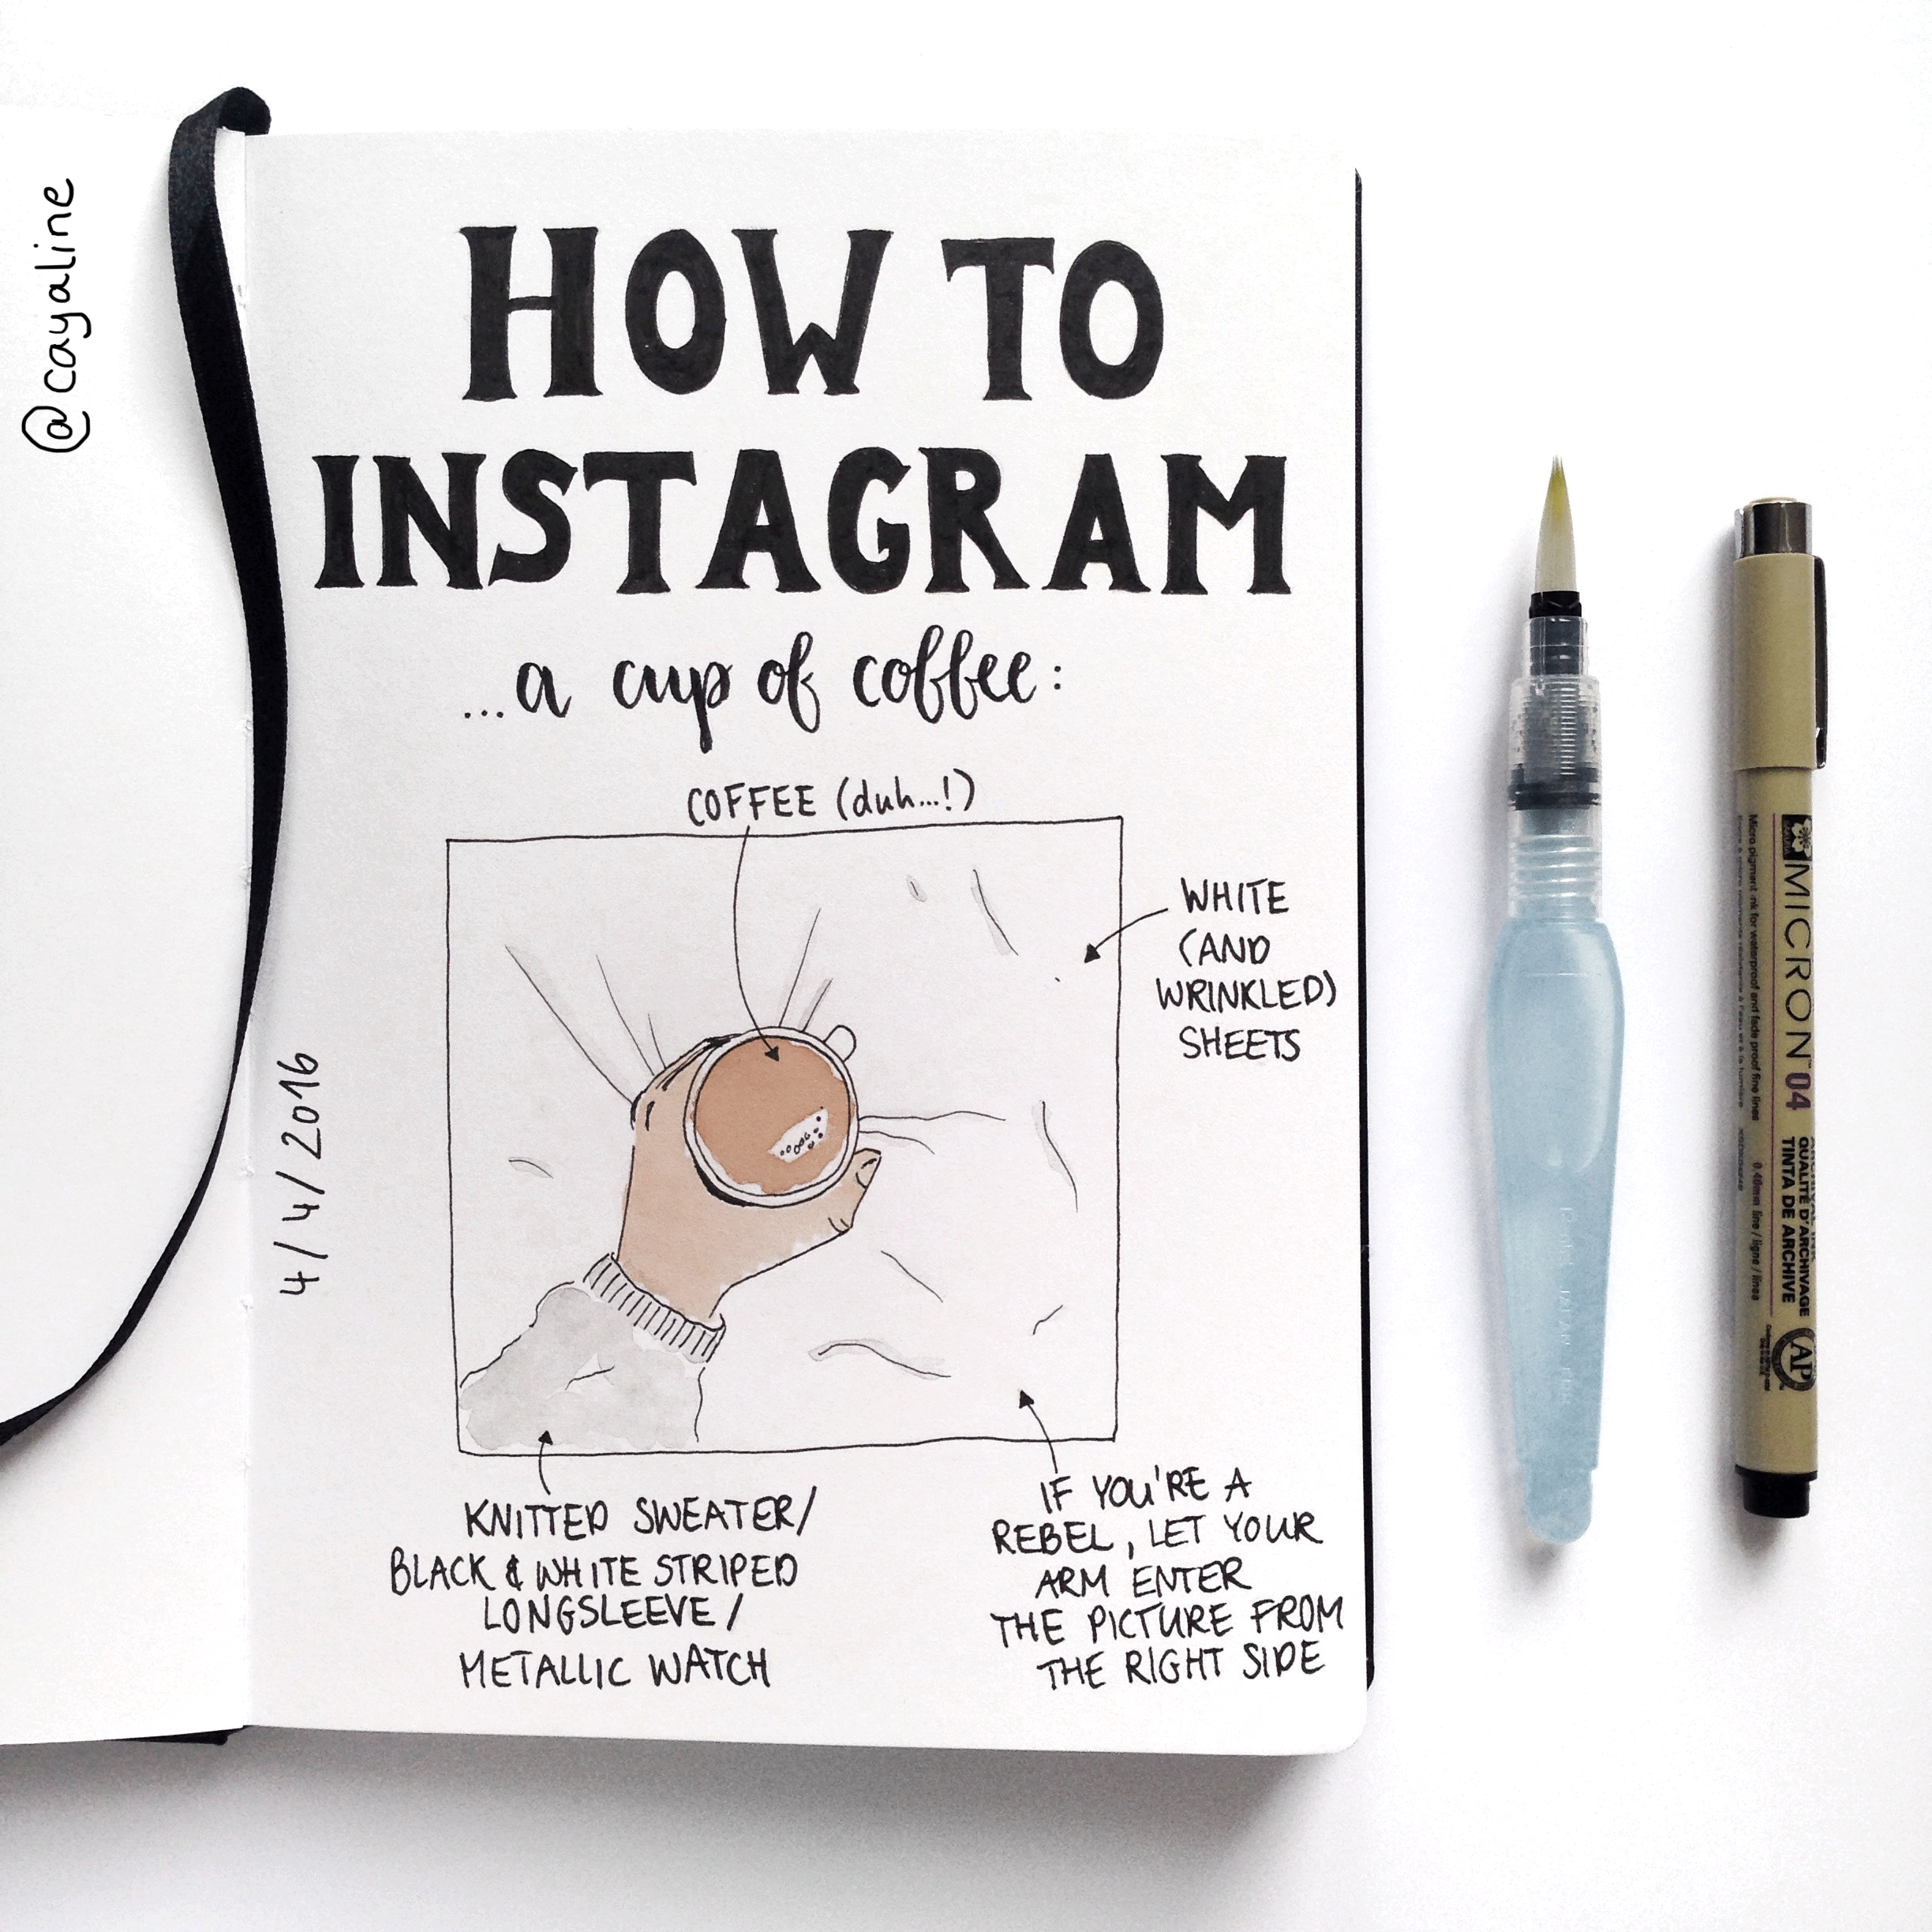 How to Instagram a cup of coffee | Carolin Hohberg